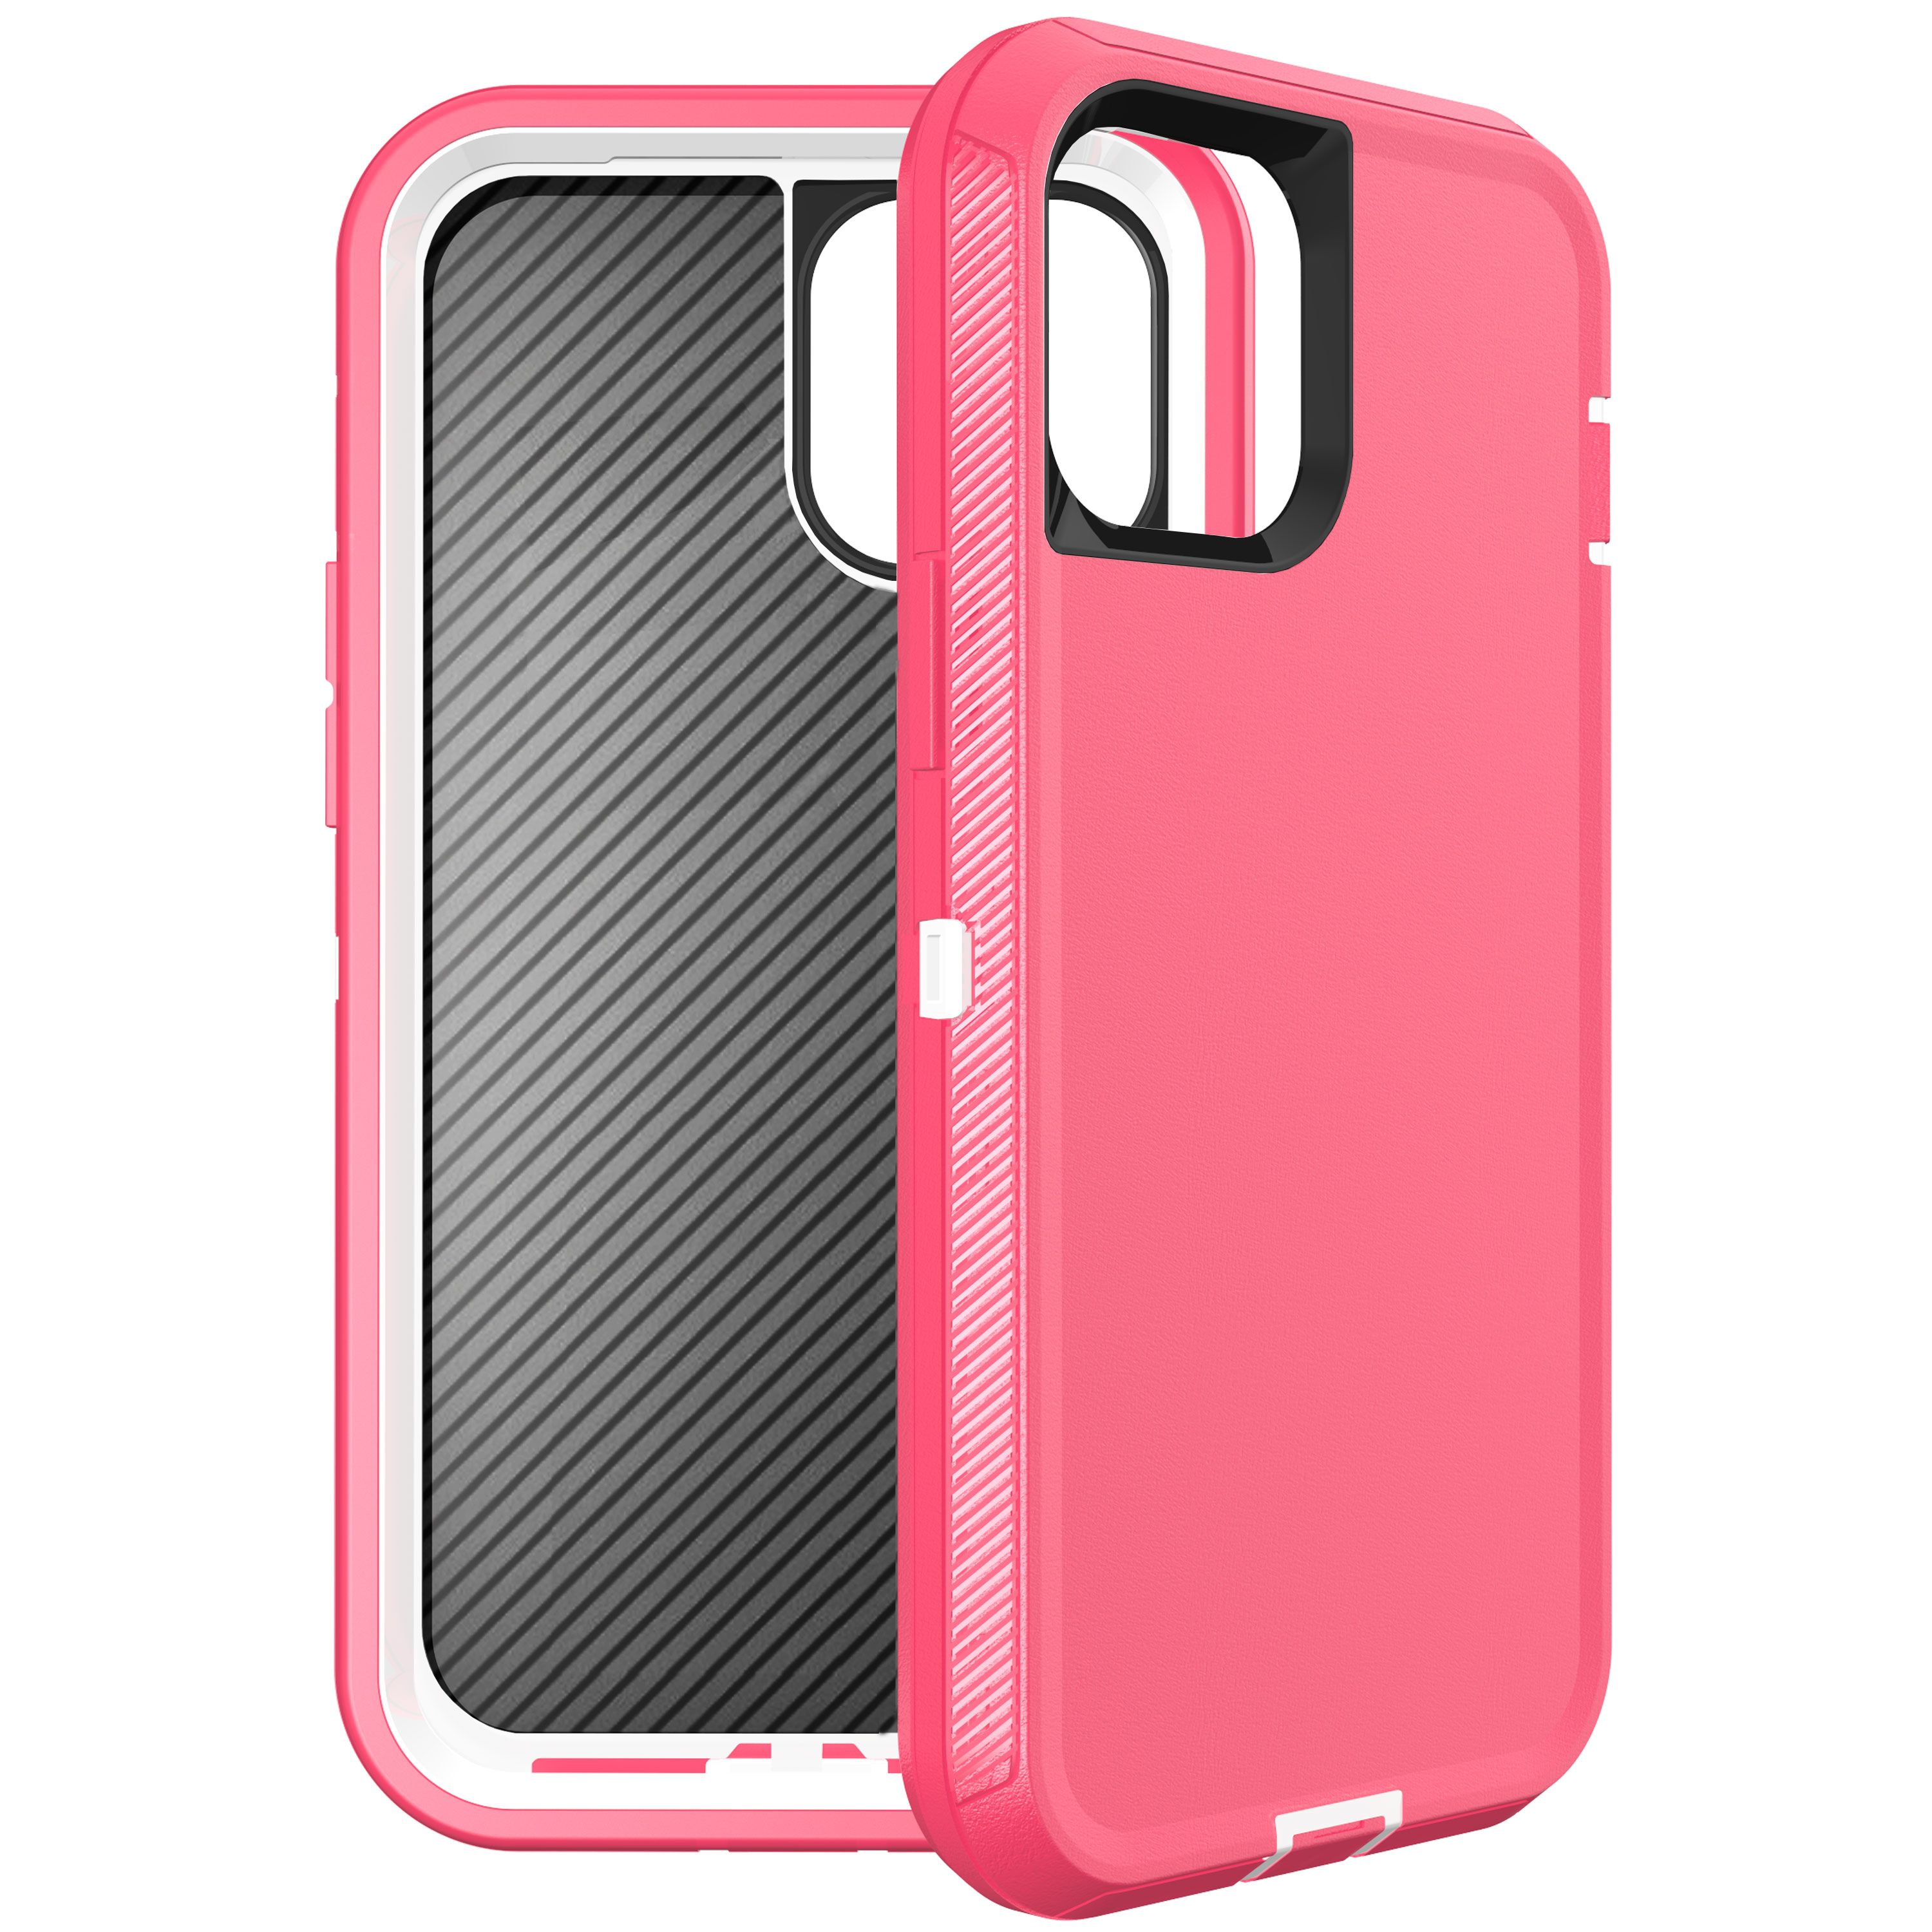 Armor Robot Case for iPHONE 12 / 12 Pro 6.1 (Hot Pink - White)